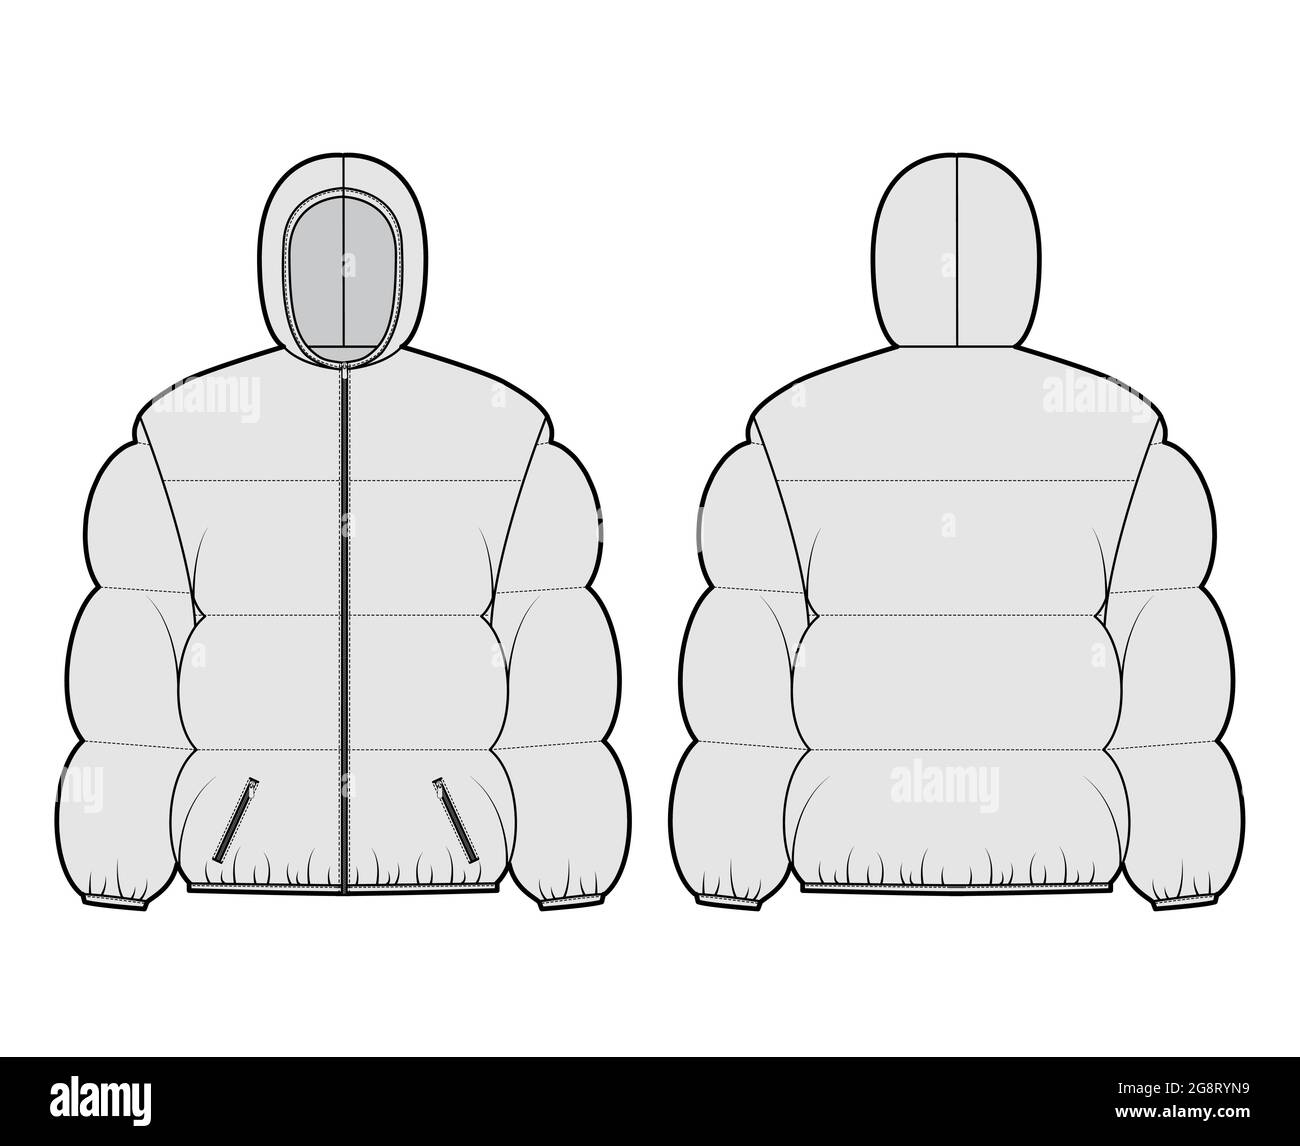 Wind proof jacket Stock Vector Images - Alamy